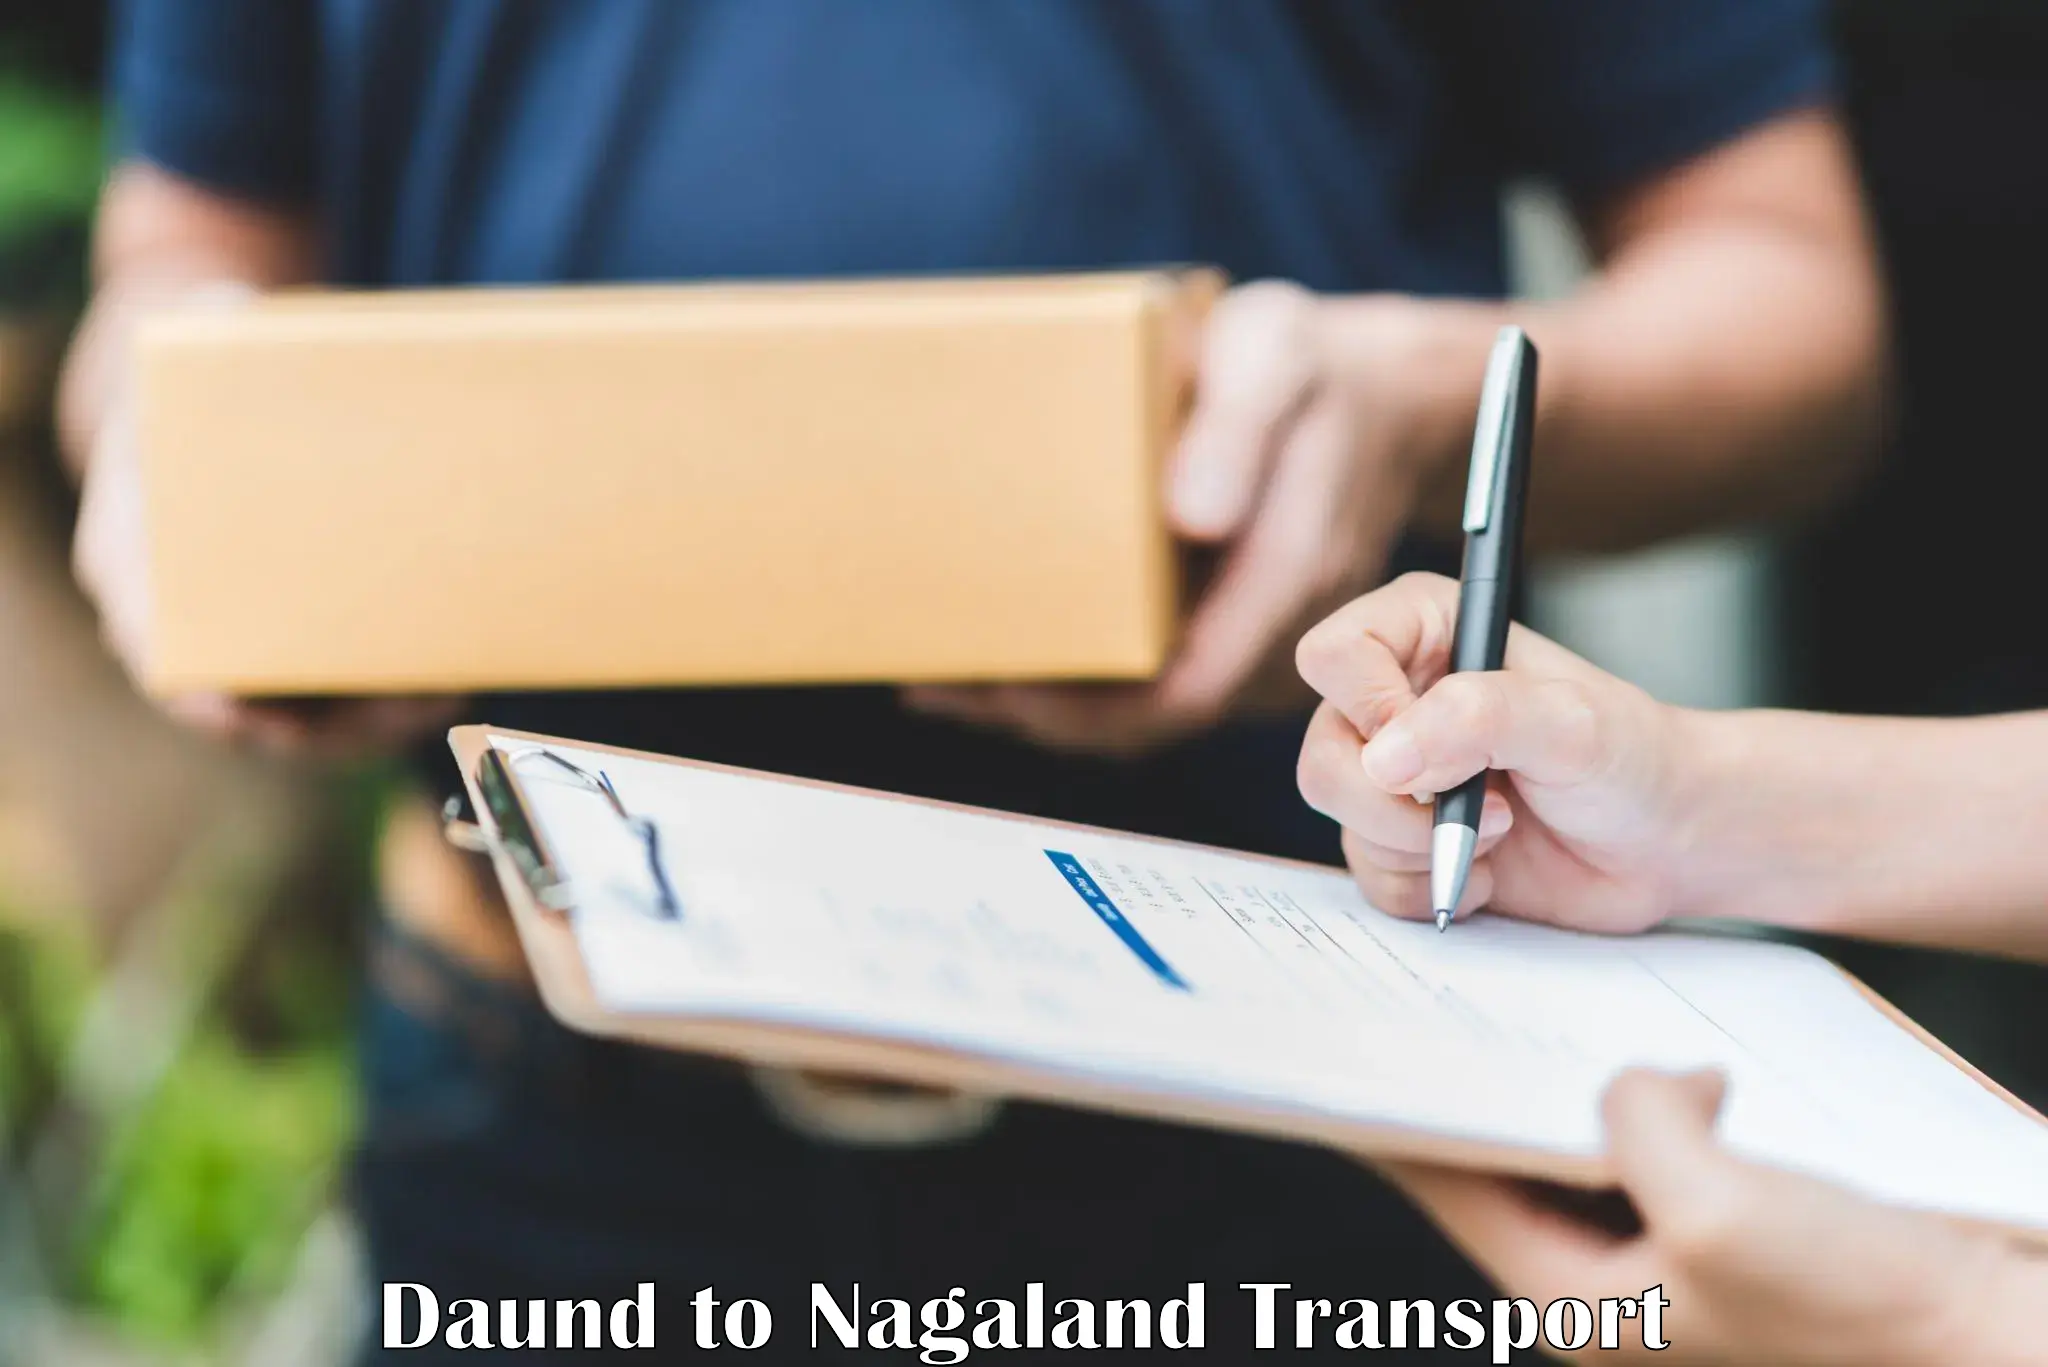 Nationwide transport services Daund to Nagaland